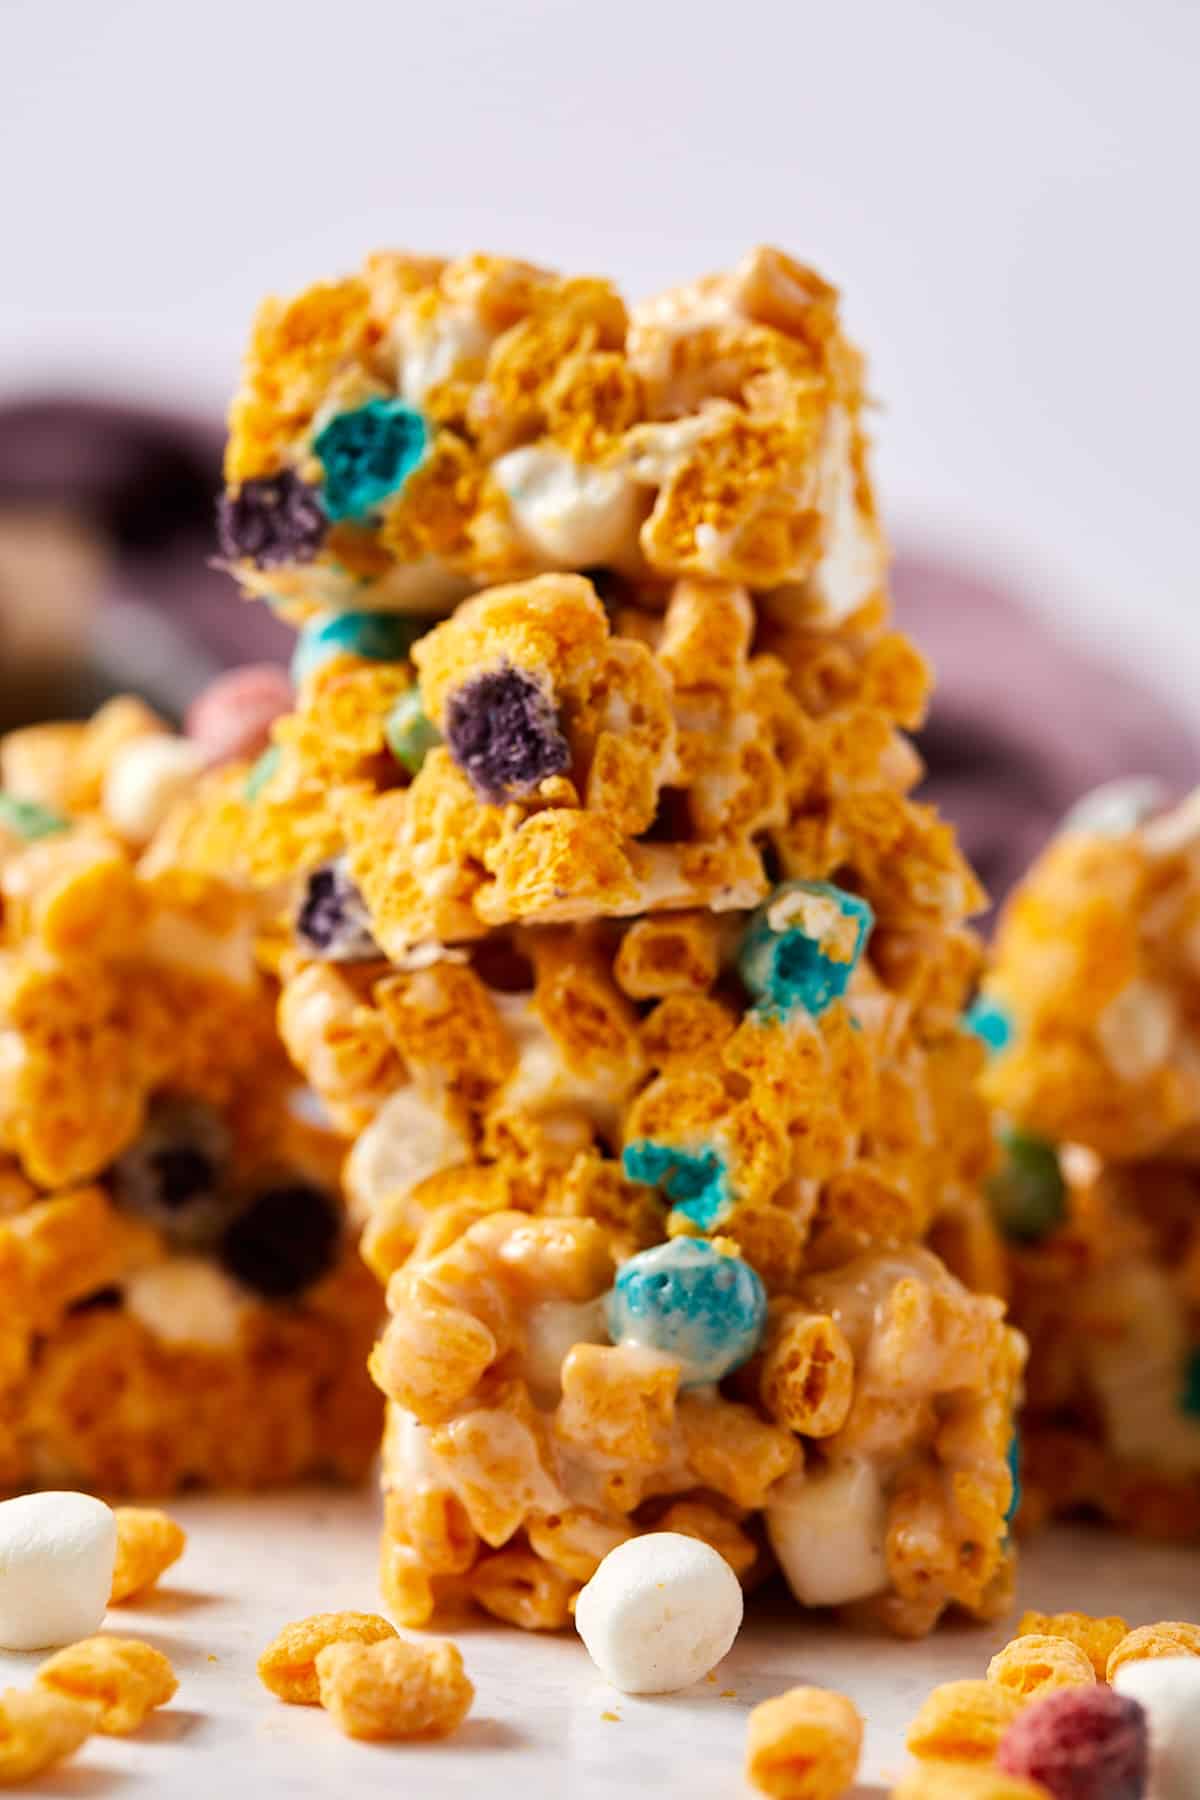 Stack of Captain Crunch cereal treats.